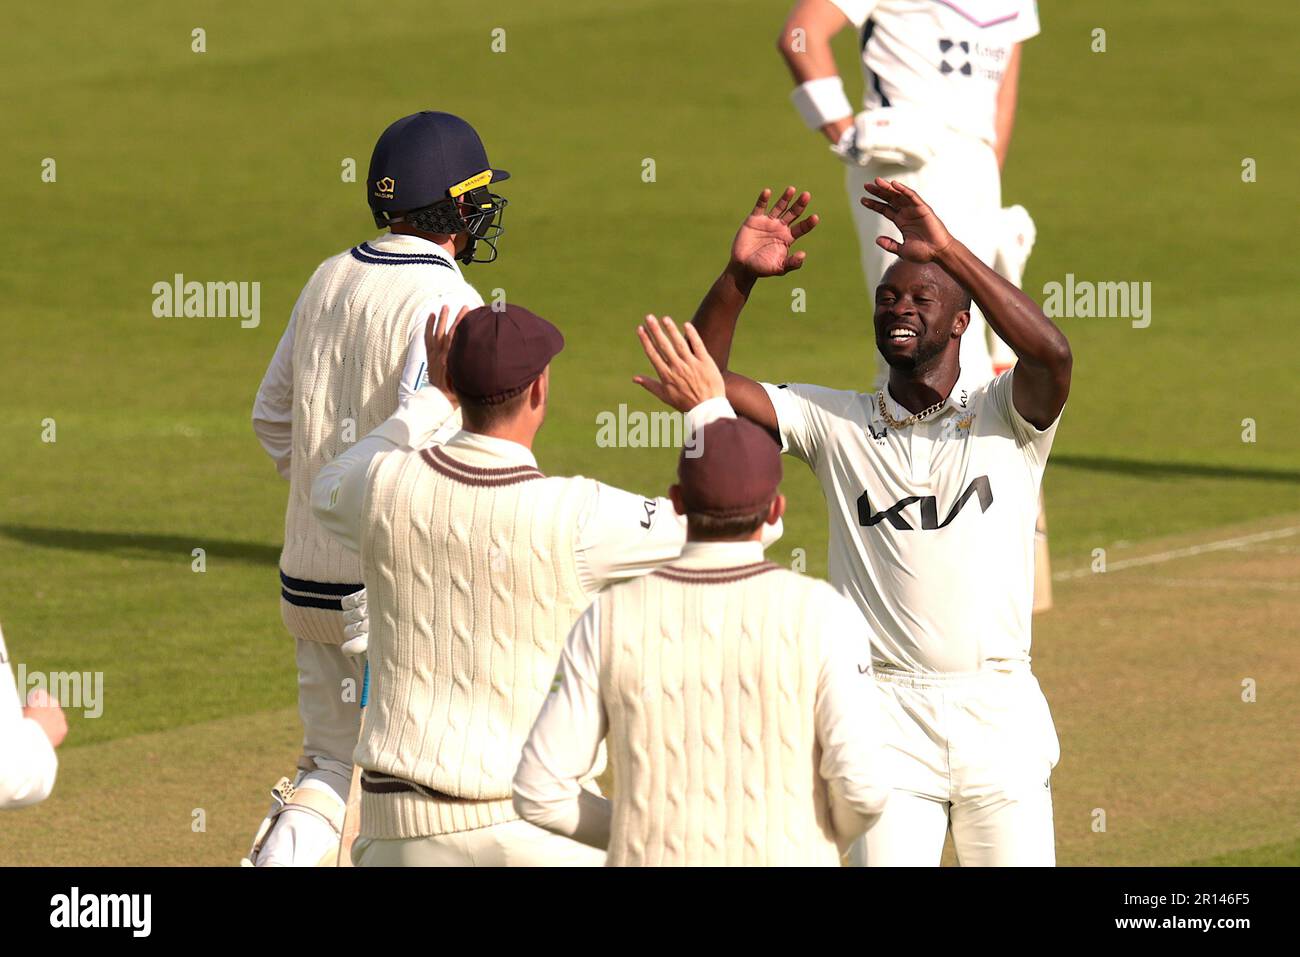 12 May, 2023. London, UK. Surrey’s Kemar Roach celebrates after getting the wicket of Middlesex’s Ryan Higgins as Surrey take on Middlesex in the County Championship at the Kia Oval, day two. David Rowe/Alamy Live News Stock Photo